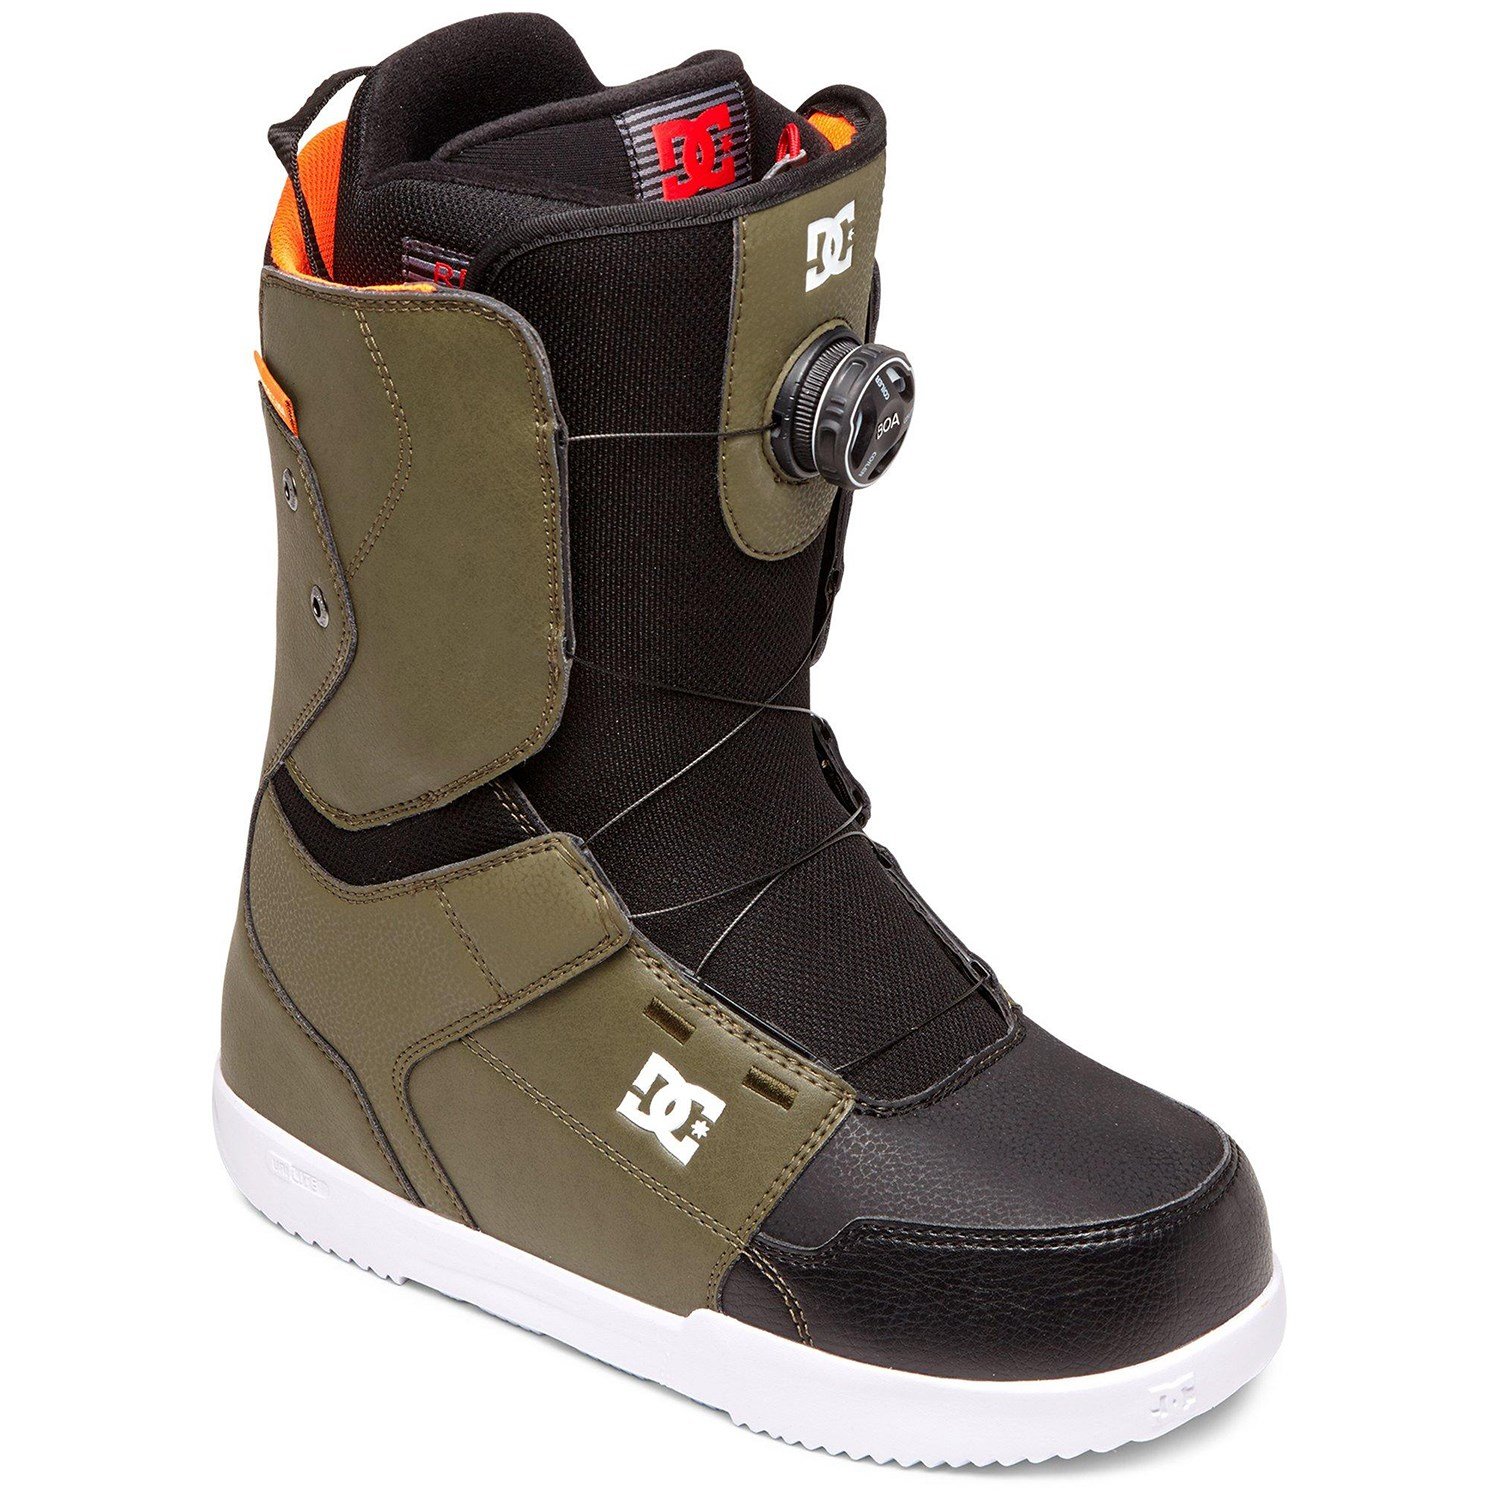 dc scout snowboard boots review